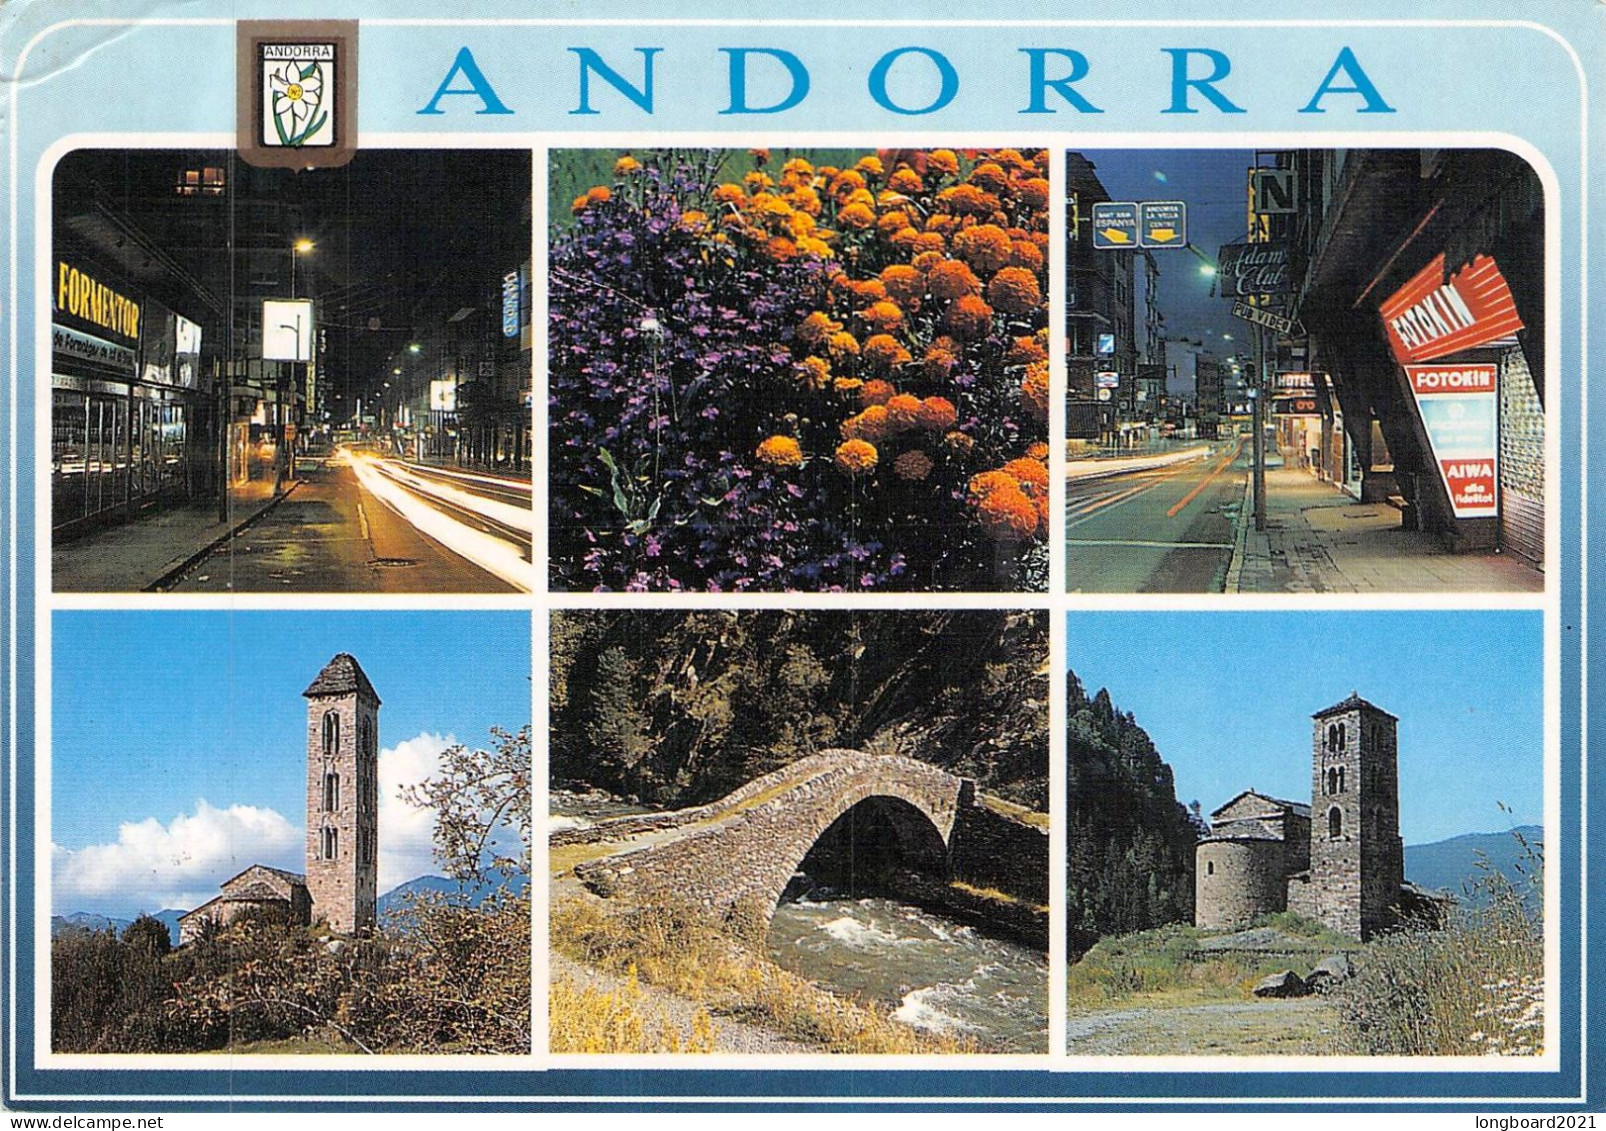 ANDORRA - PICTURE POSTCARD 1990 / 1394 - Covers & Documents